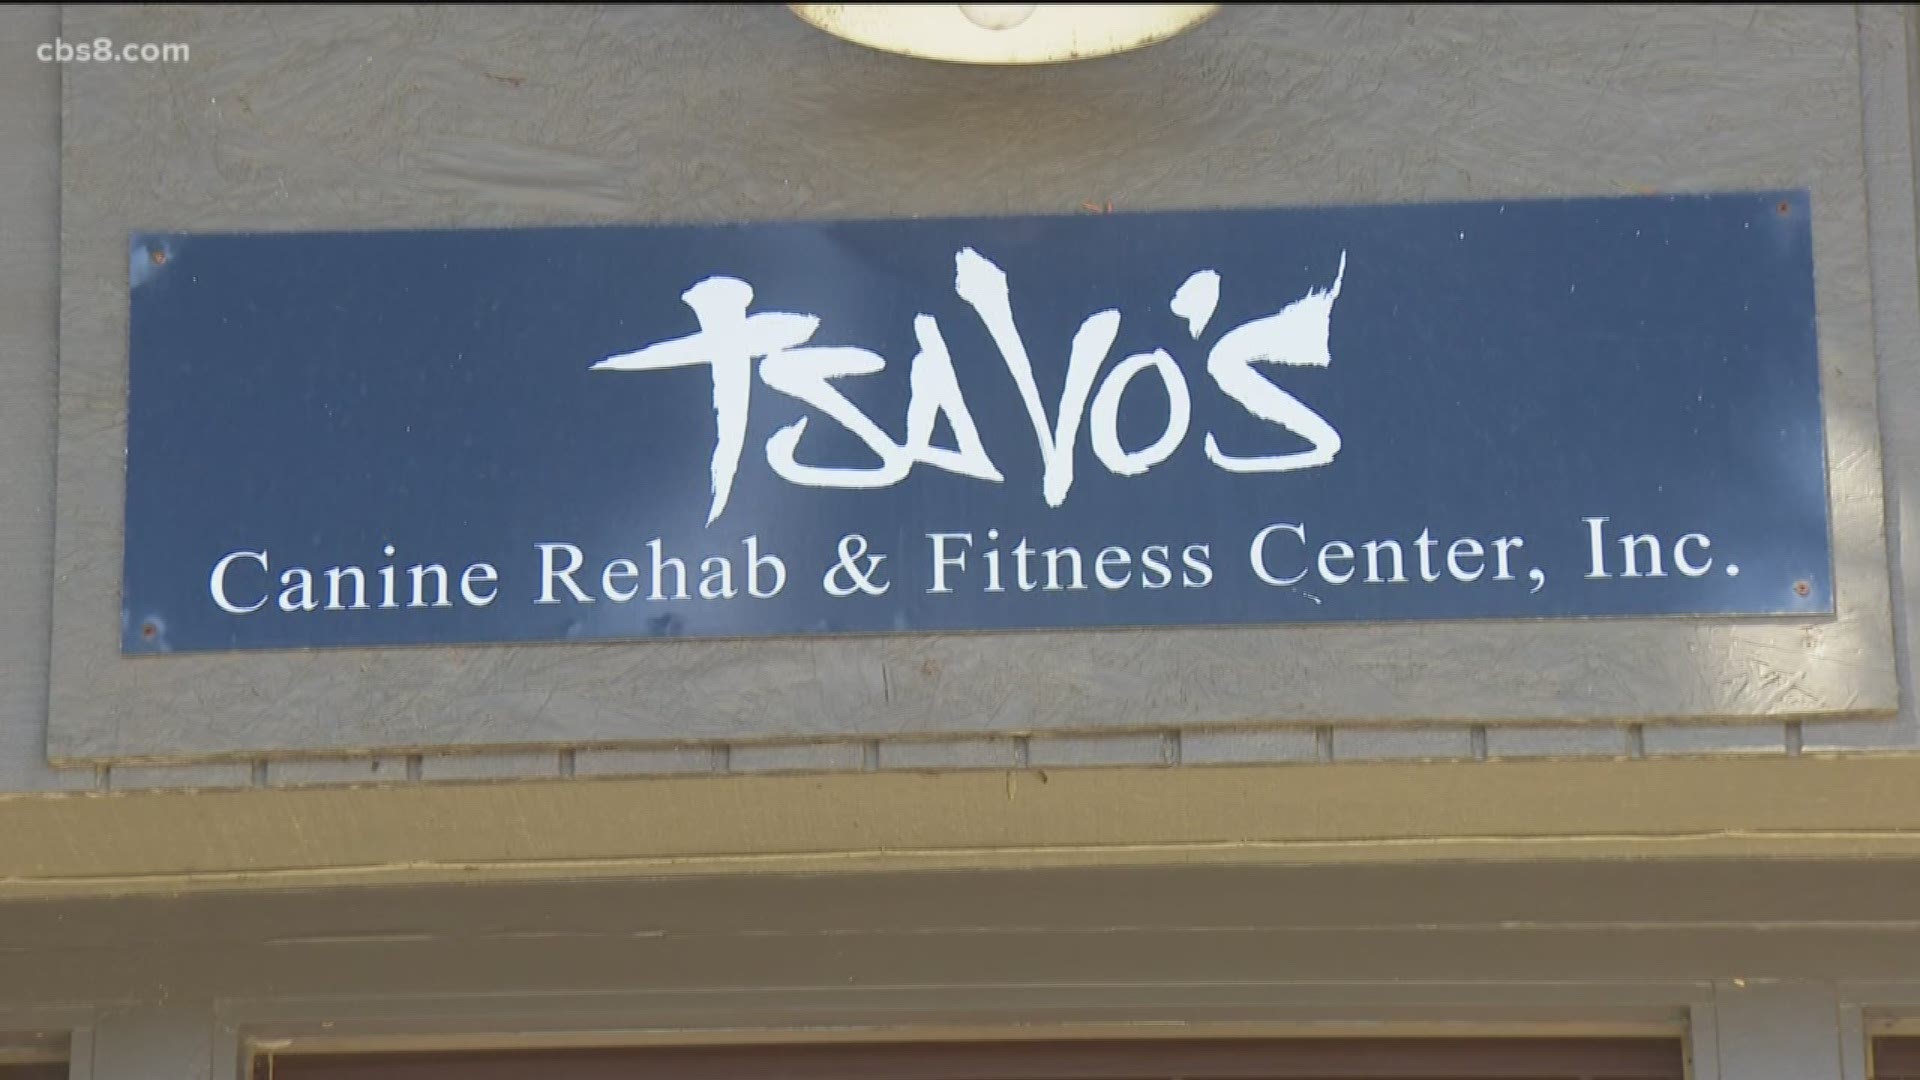 Dog rescue groups' medical care can be costly and now Tasvo’s Canine Rehabilitation and Fitness Center is expanding its campus to help canine rescue organizations.